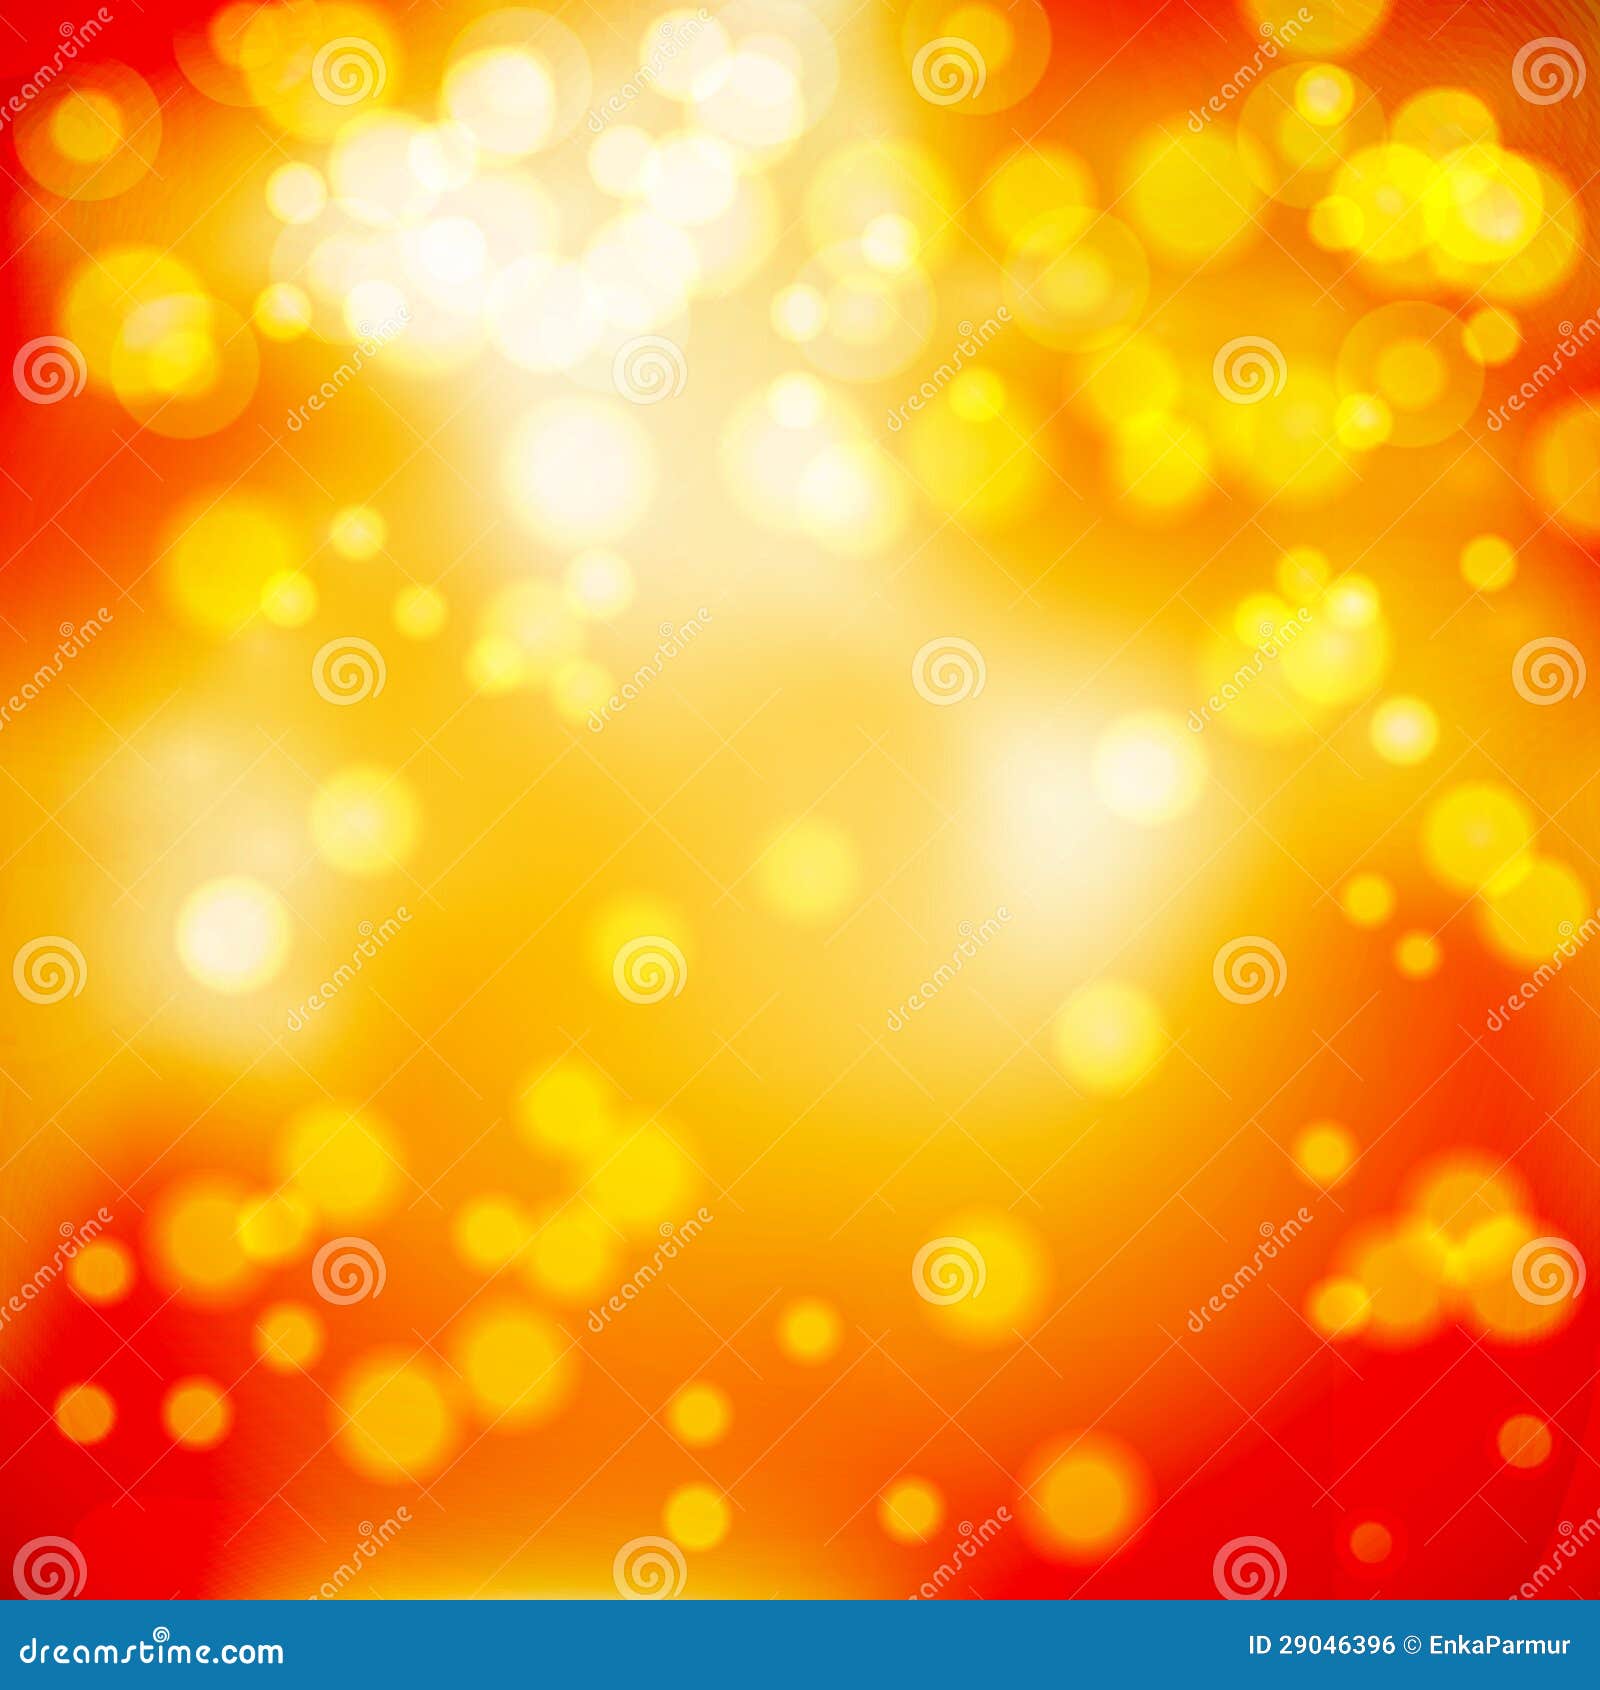 Yellow red glow background stock illustration. Illustration of yellow -  29046396